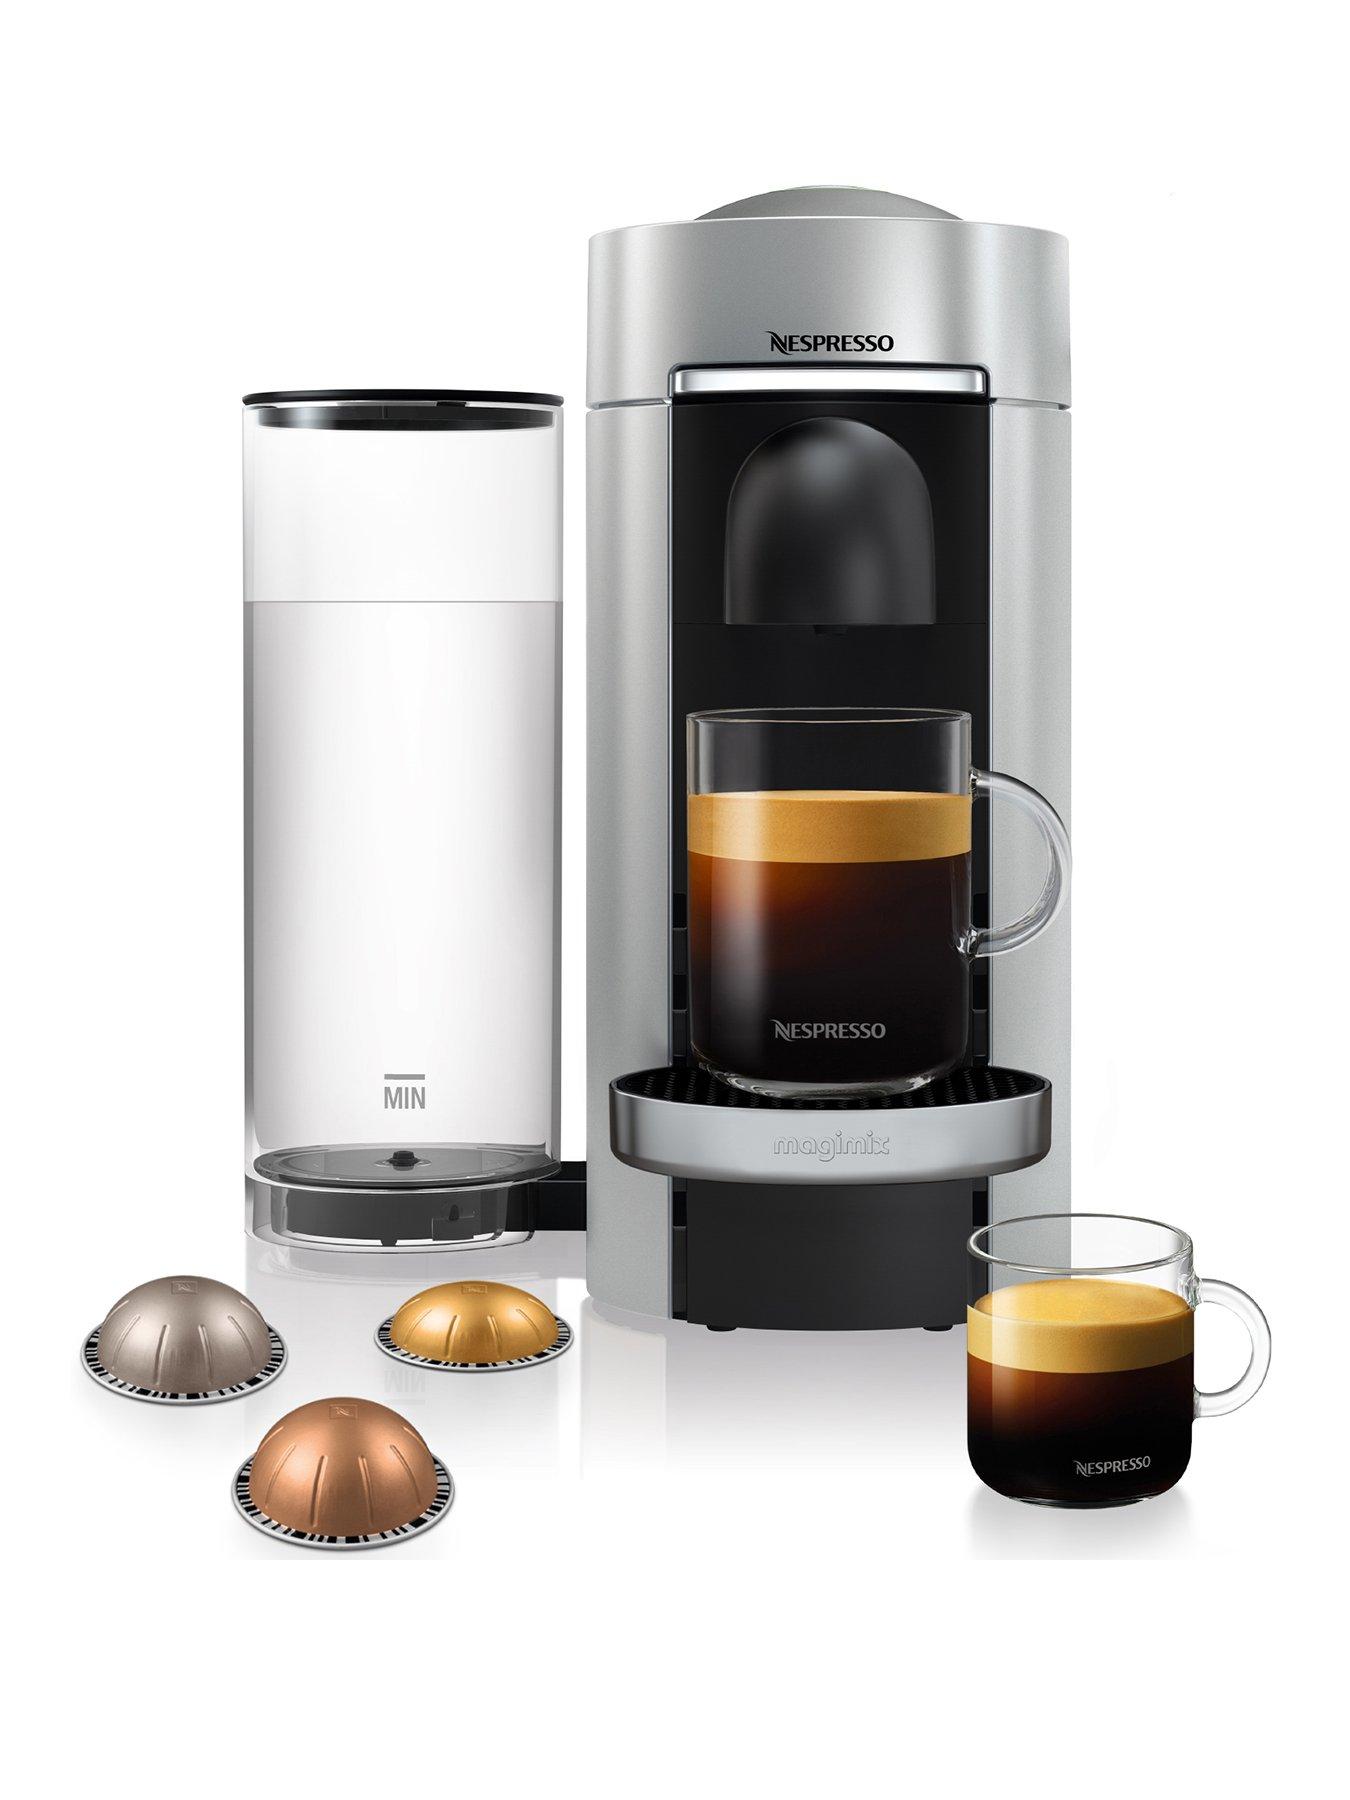 Nespresso's latest pod coffee machine was my wake-up call to what a cuppa  can be